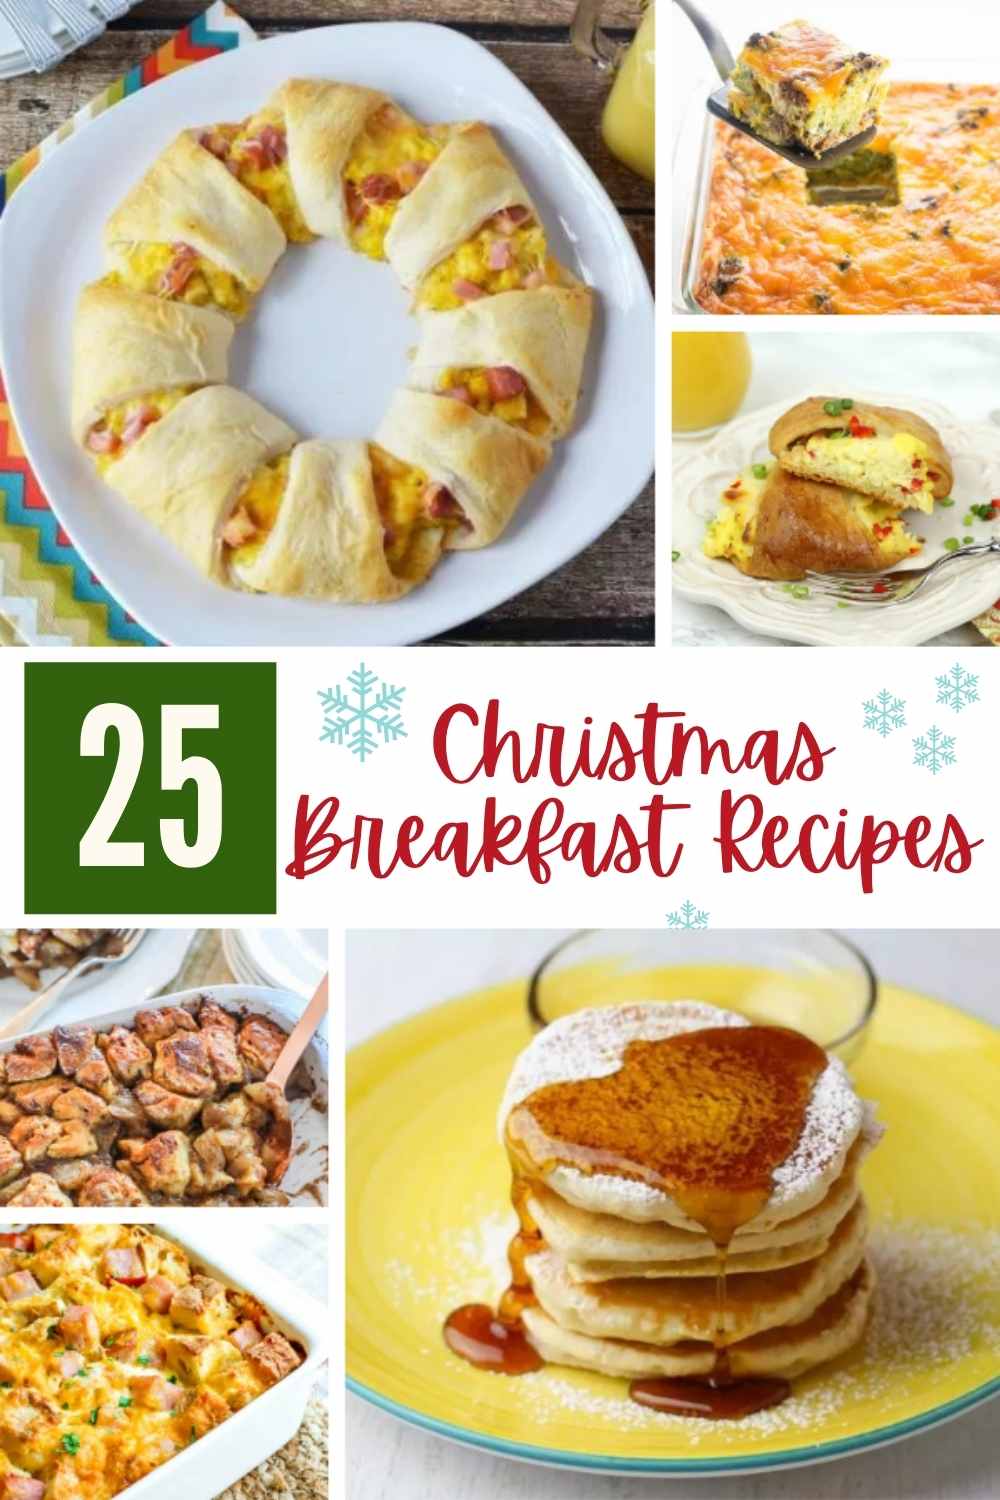 Photo collage of breakfast recipes for Christmas morning with text overlay.